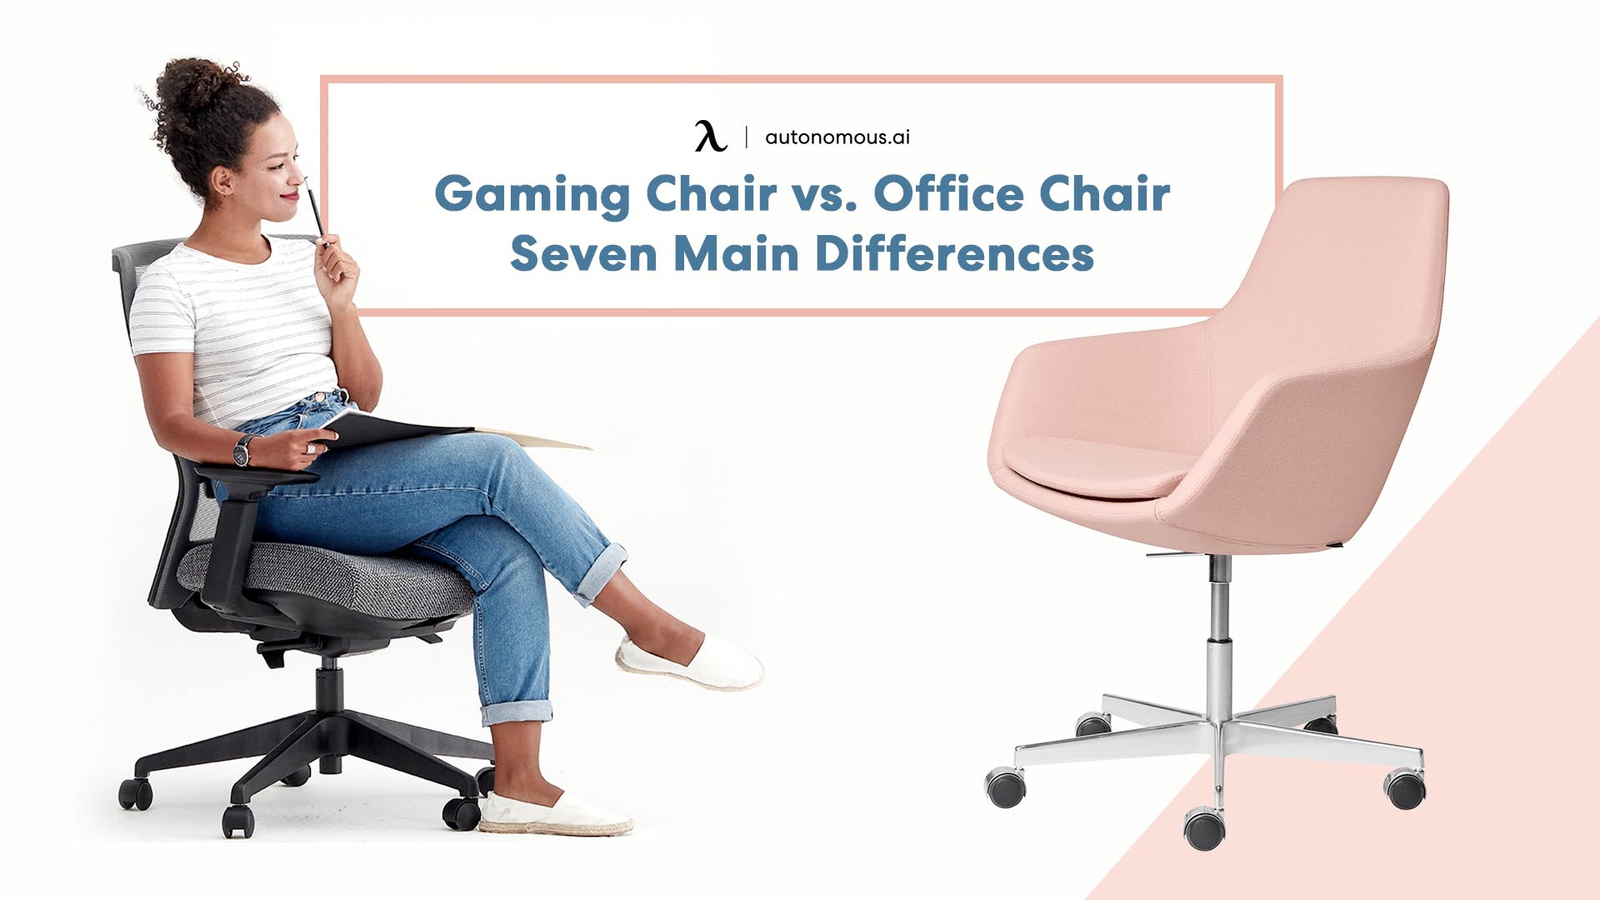 Gaming Chair vs Office Chair: 7 Main Differences